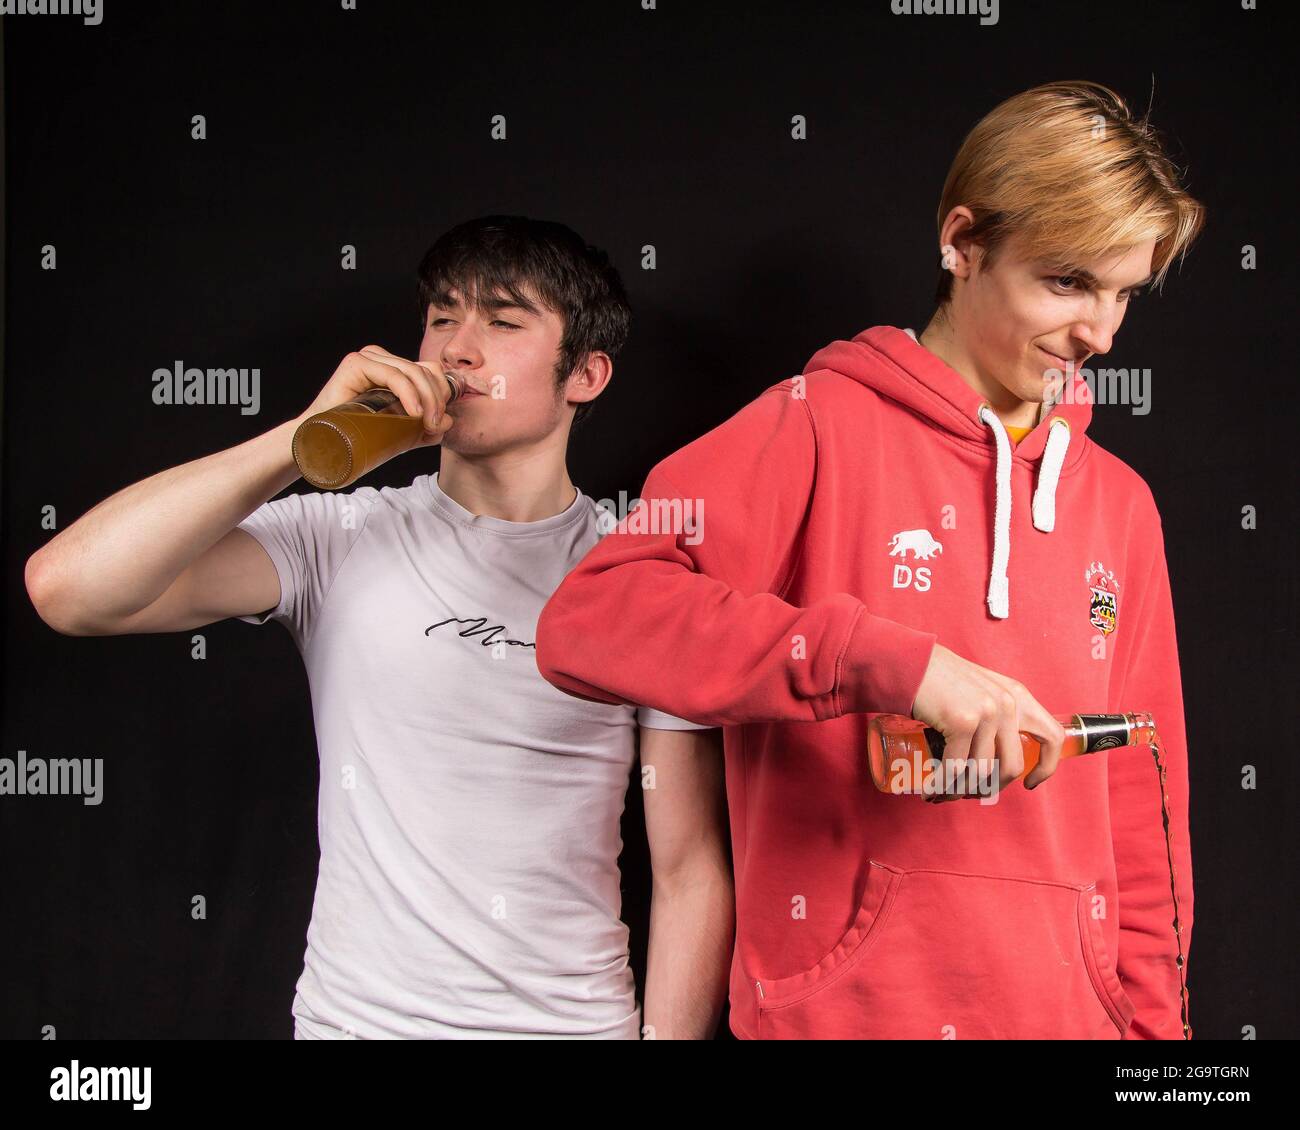 A male youth pours away his beer, feeling peer pressure to take a drink of alcohol Stock Photo